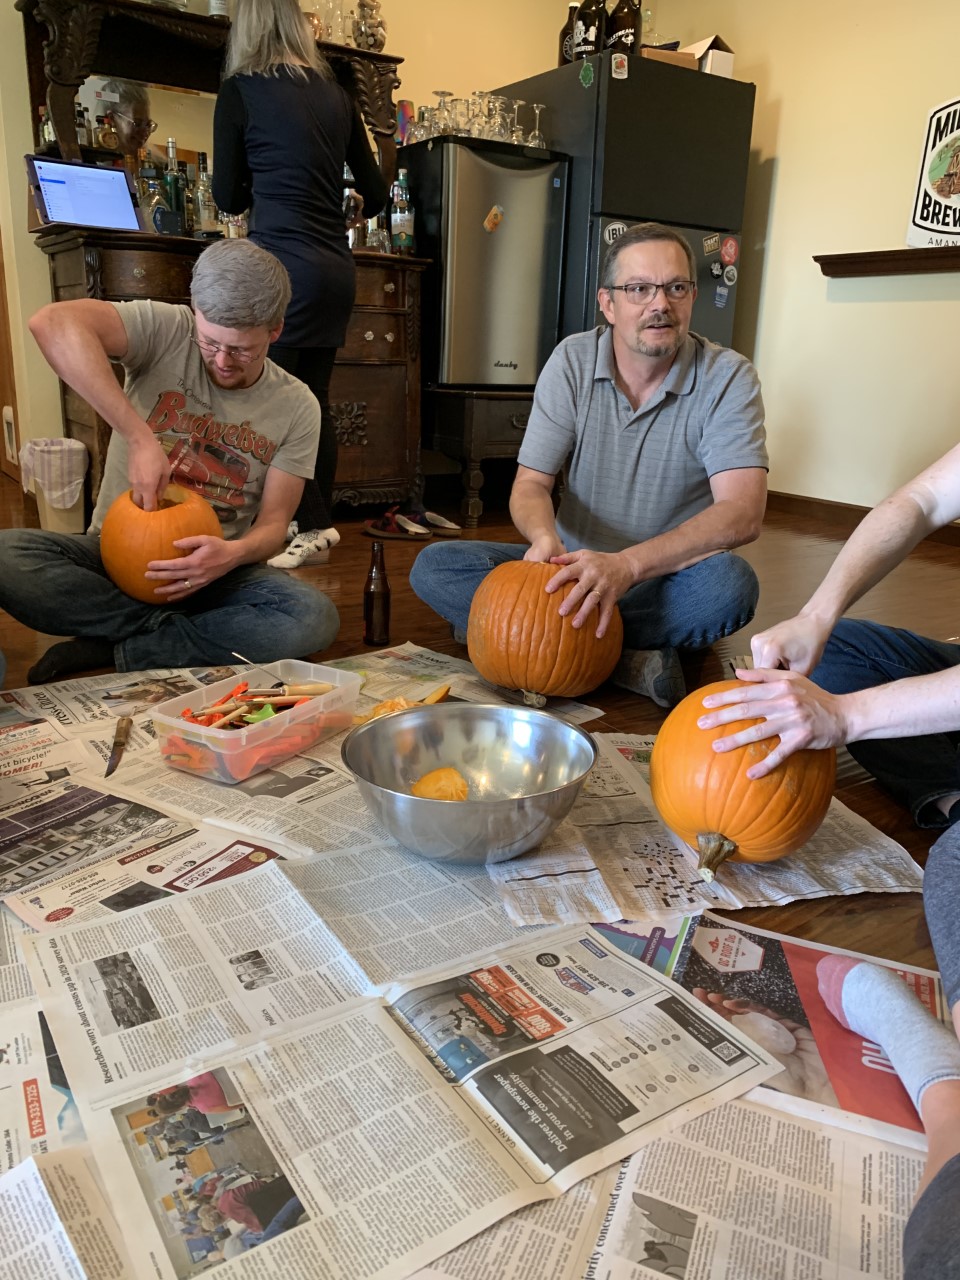 Greg getting to ready to carve the best pumpkin